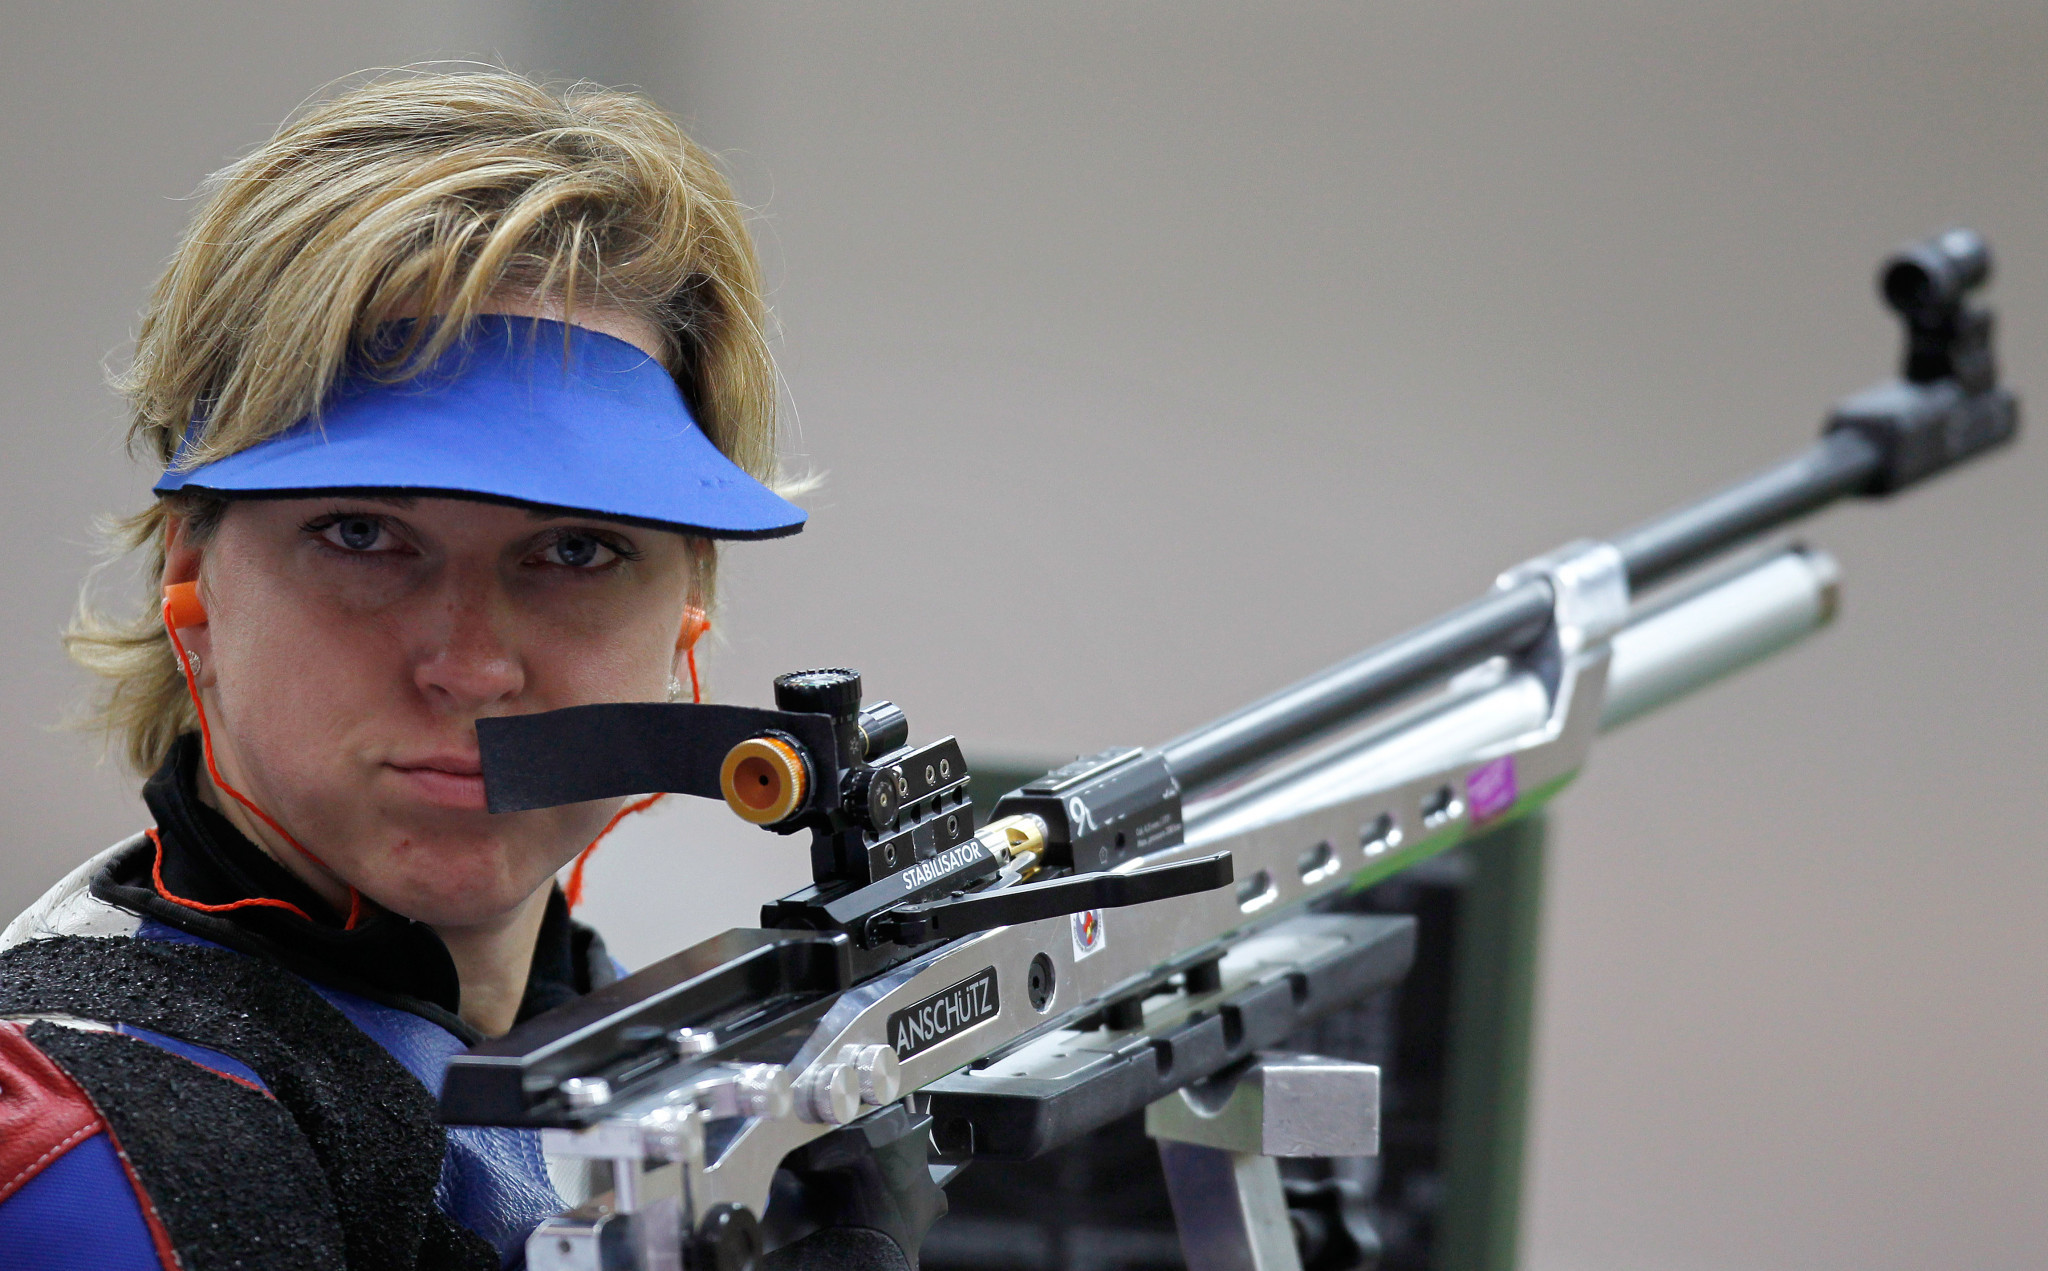 Veronika Vadovicova of Slovakia is also among those expected to challenge for gold medals in Al Ain ©Getty Images